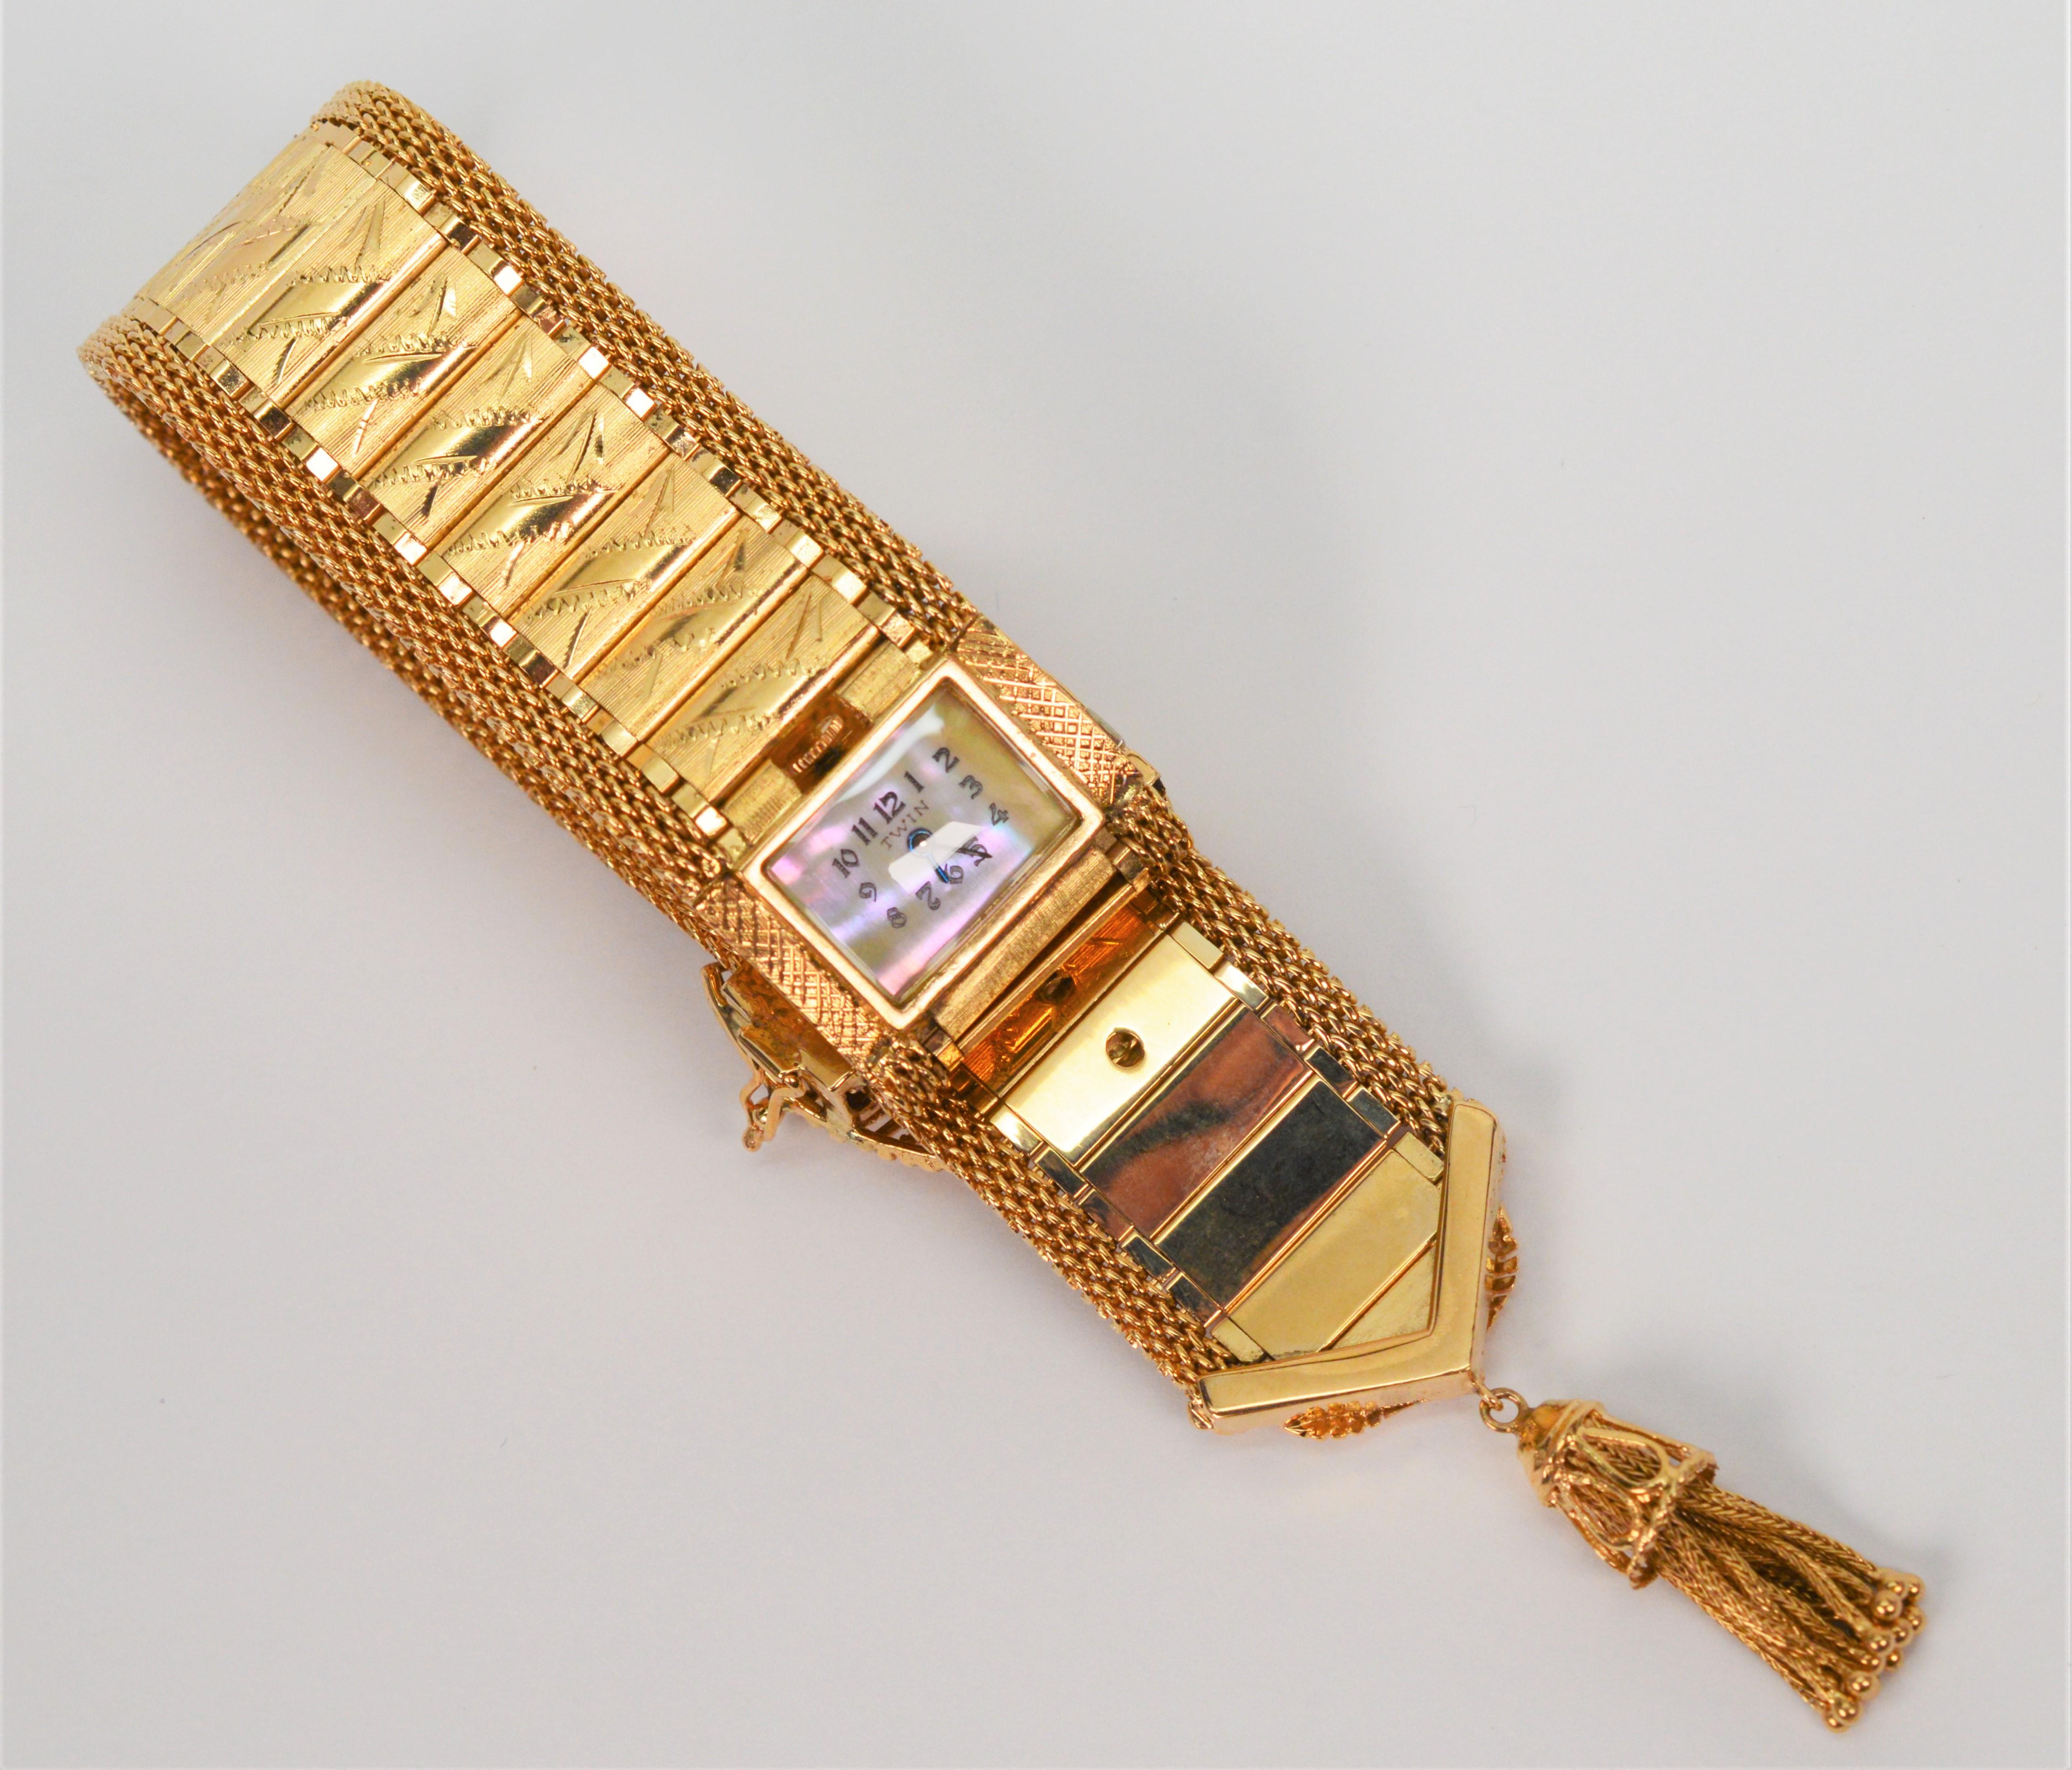 Estate 14 Karat Yellow Gold Wrap Bracelet Watch w Diamond Accents In Excellent Condition For Sale In Mount Kisco, NY